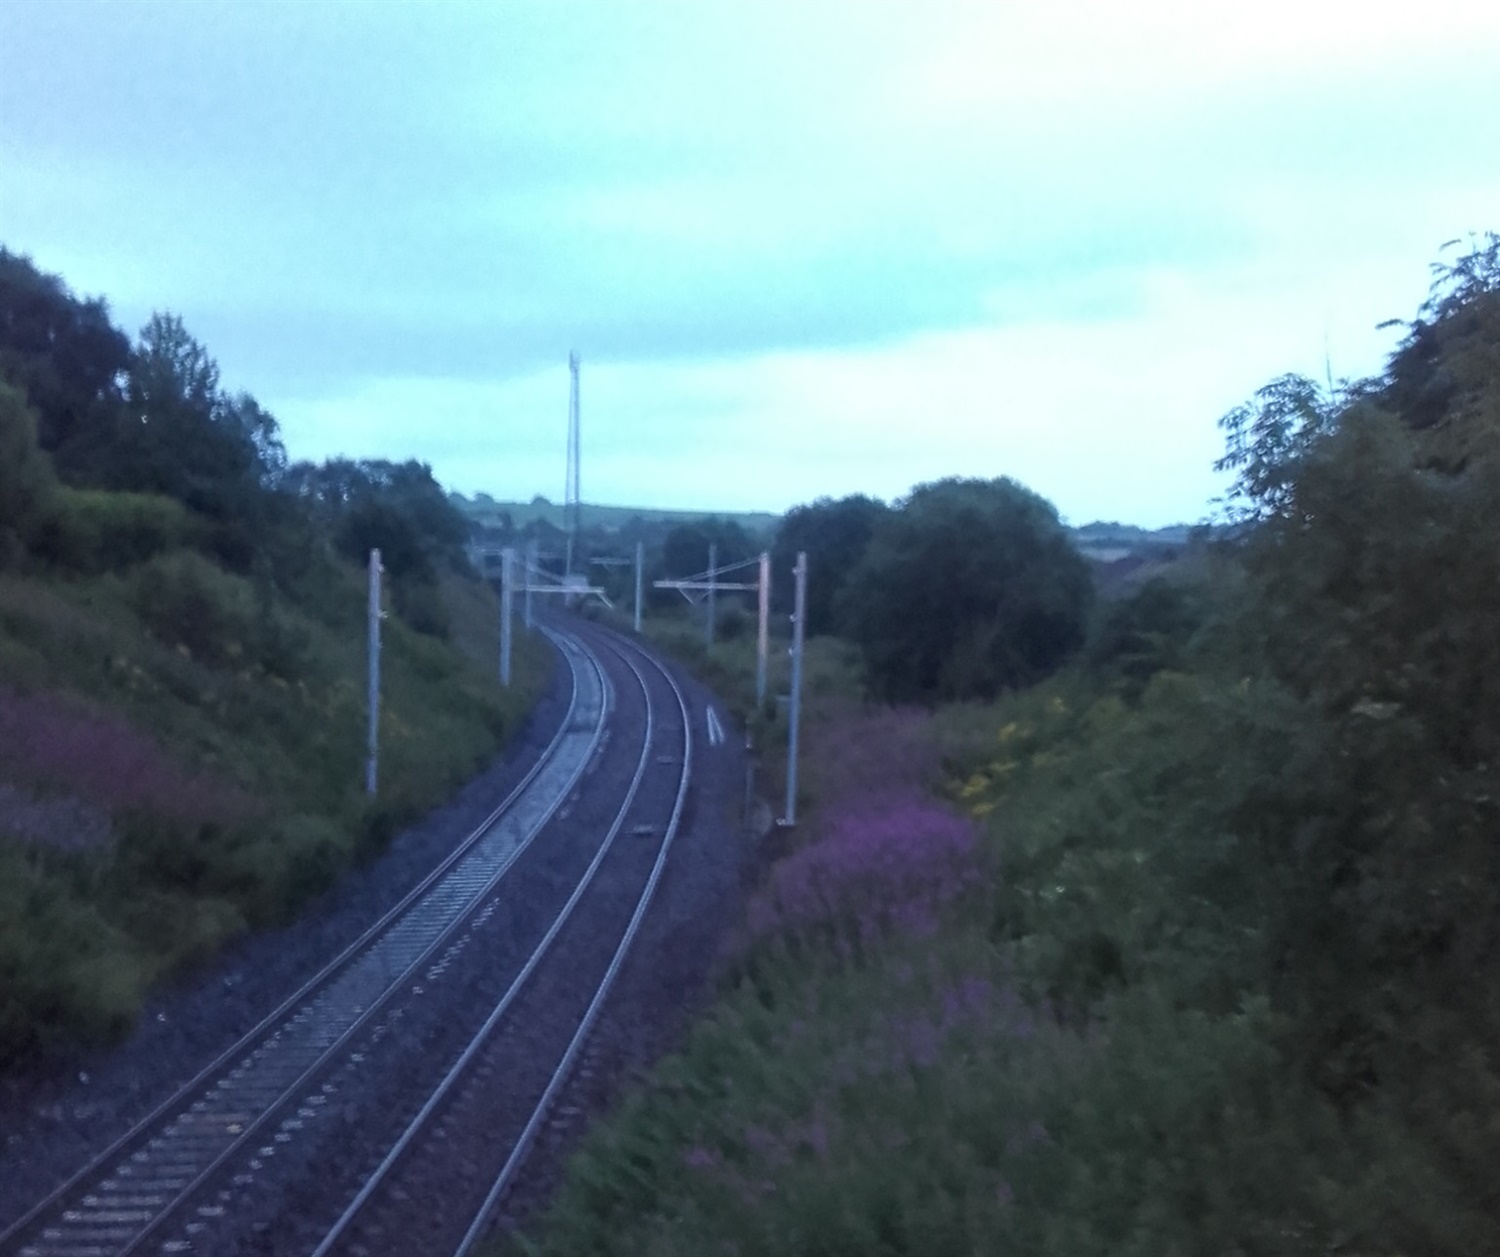 Further electrification work to begin on Shotts line as NR awards £11.6m contract